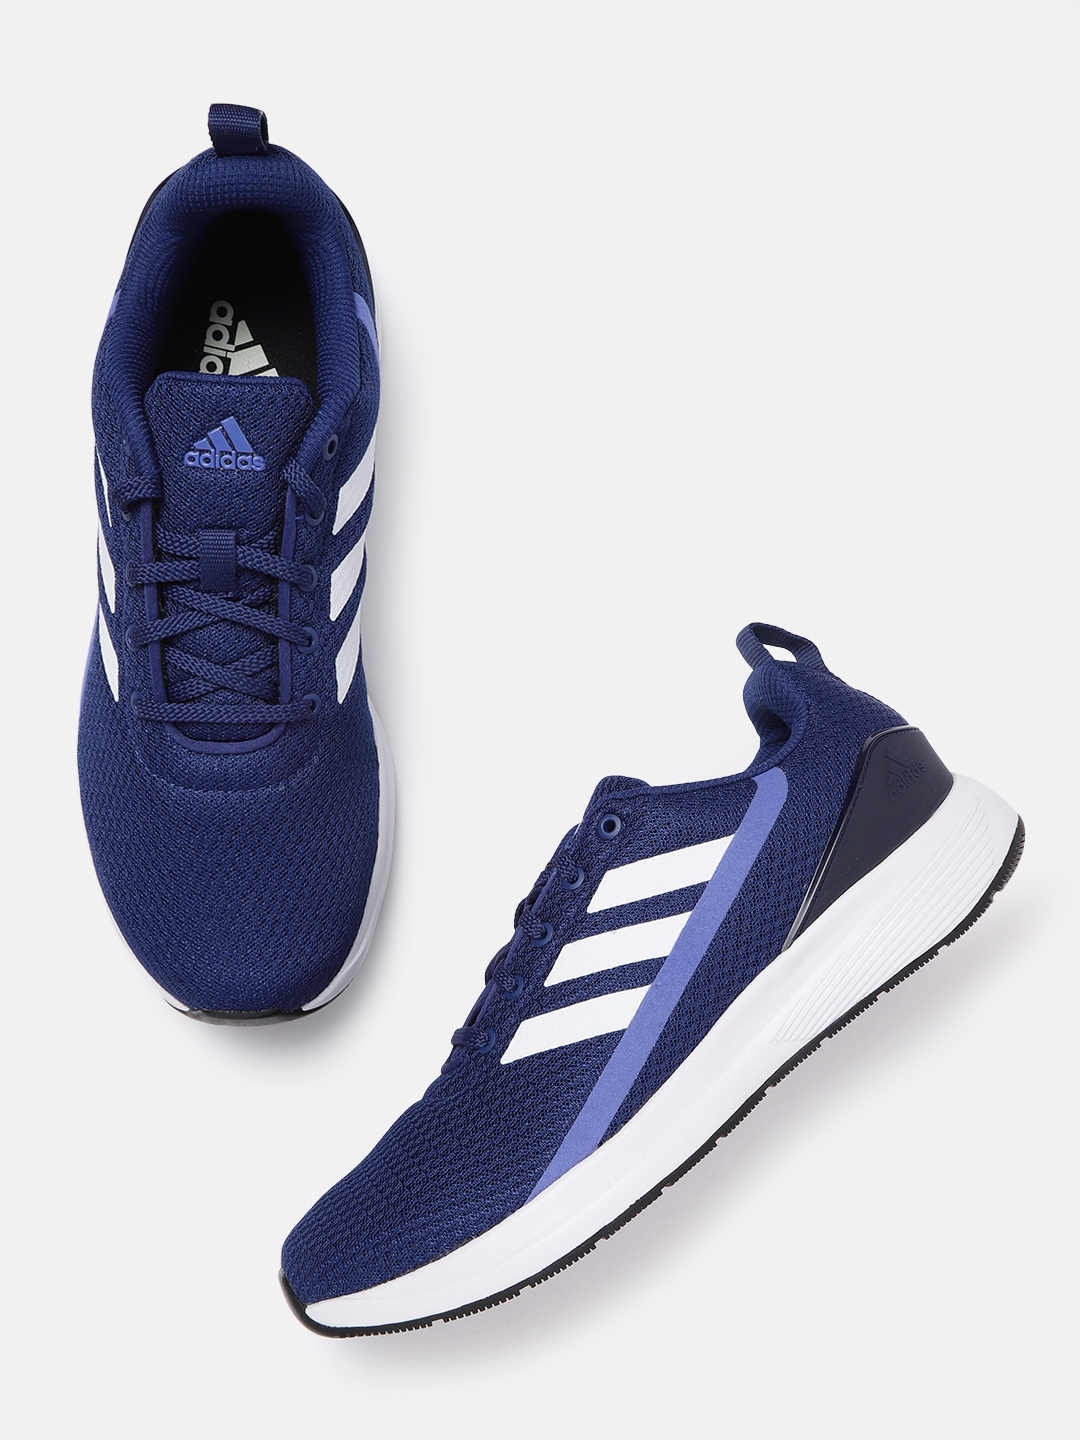 Buy ADIDAS Men Navy Blue Woven Design Pictor Running Shoes - Sports ...